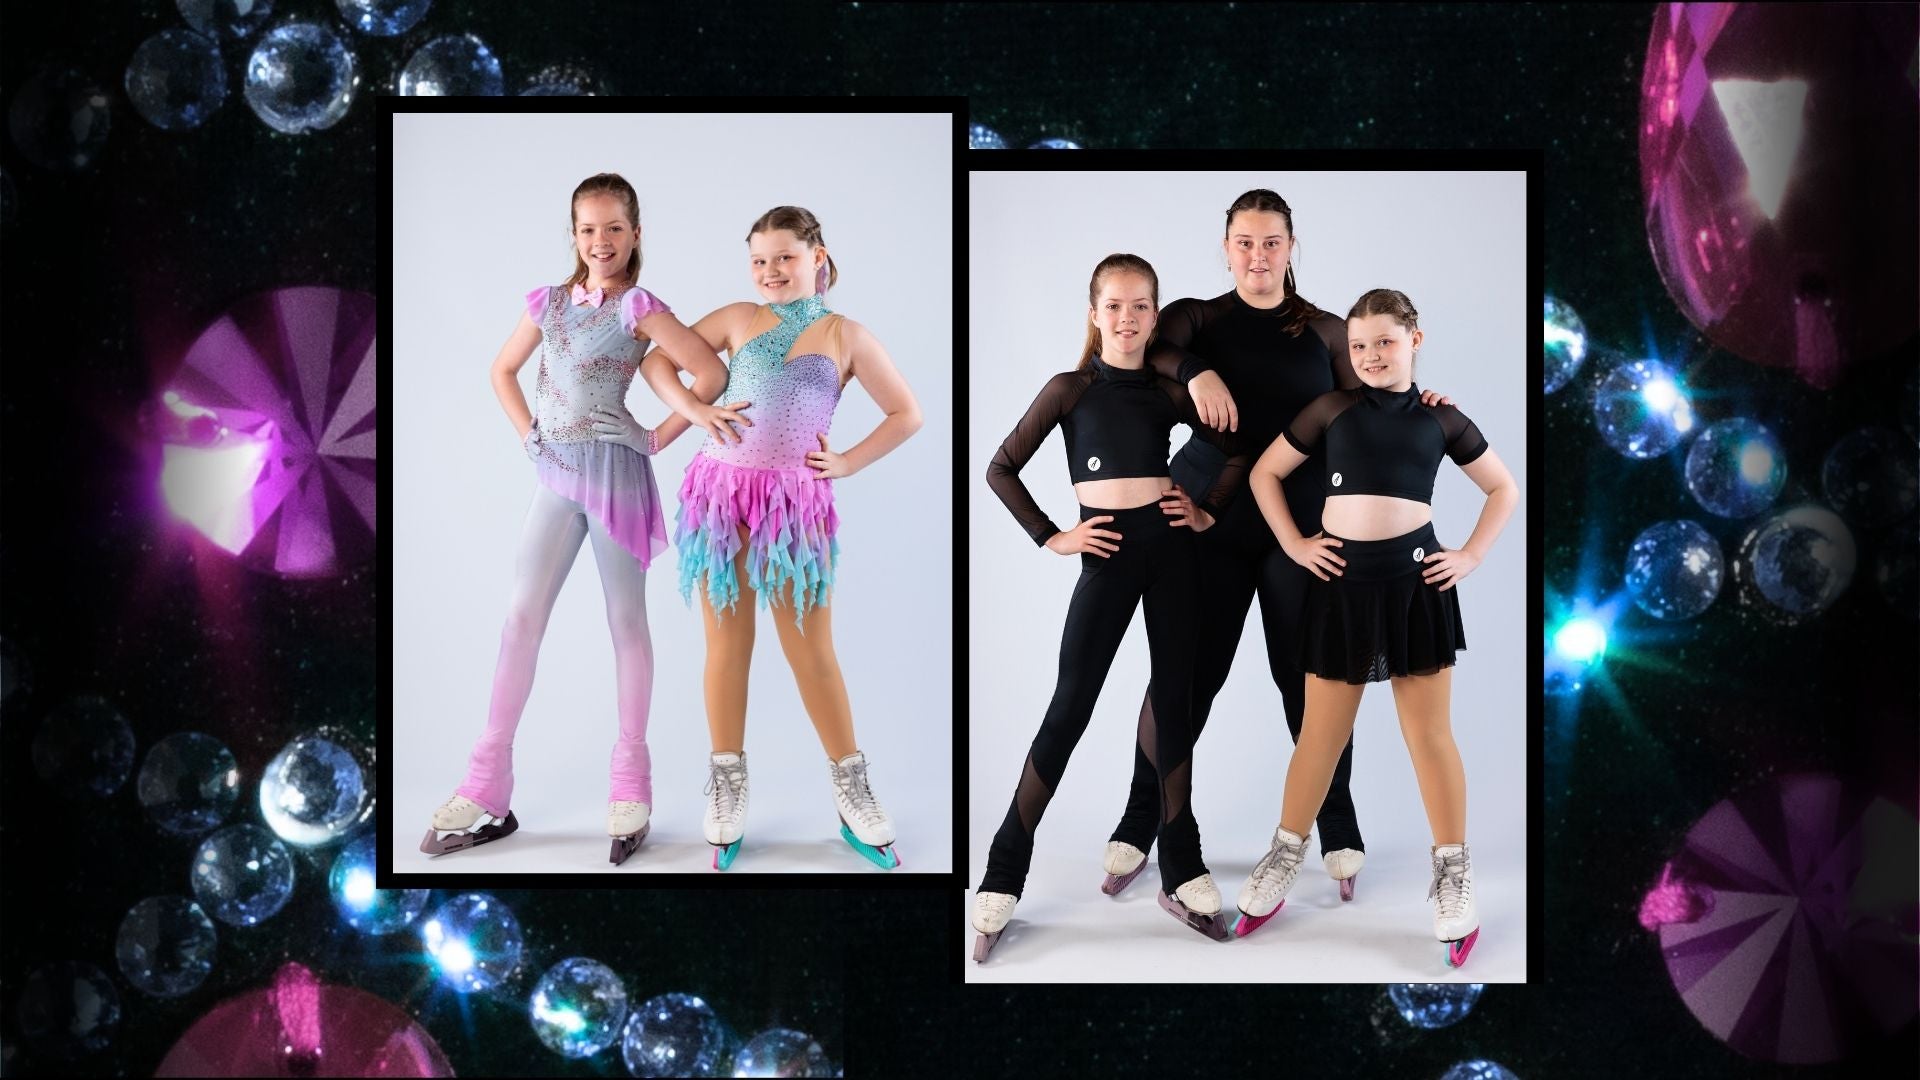 Two young figure skaters in their Alexice custom outfits, along with three young skaters wearing the Alexice Icessentials collection of elegant practicewear.